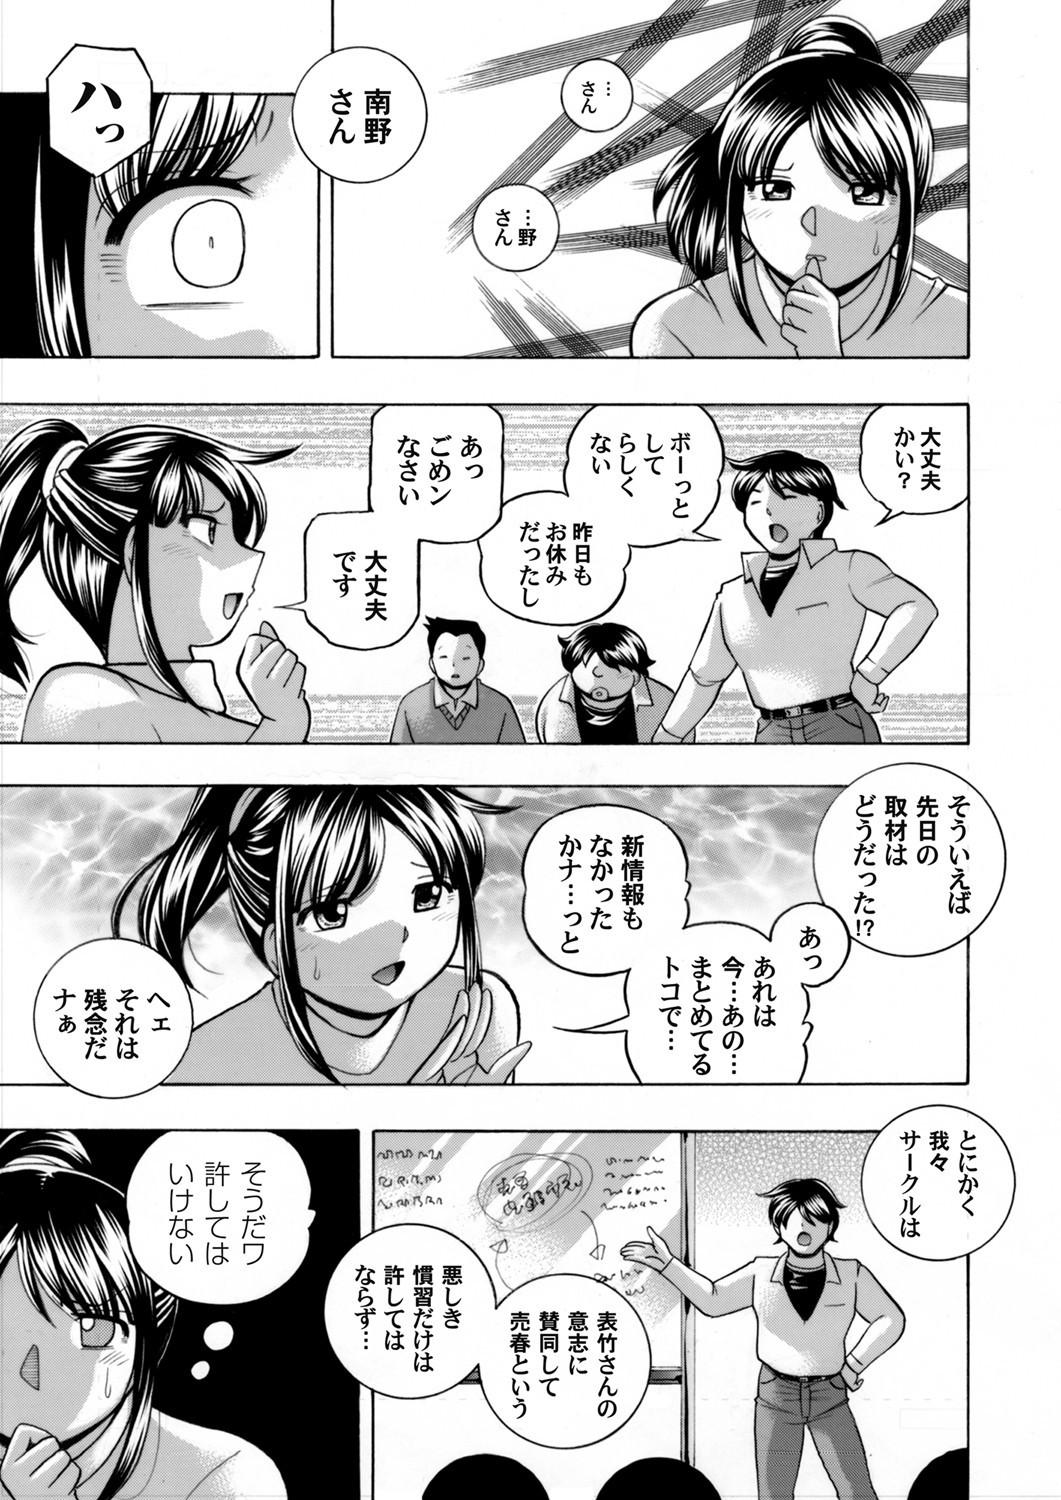 Curves コミックマグナム Vol.138 Pounded - Page 6